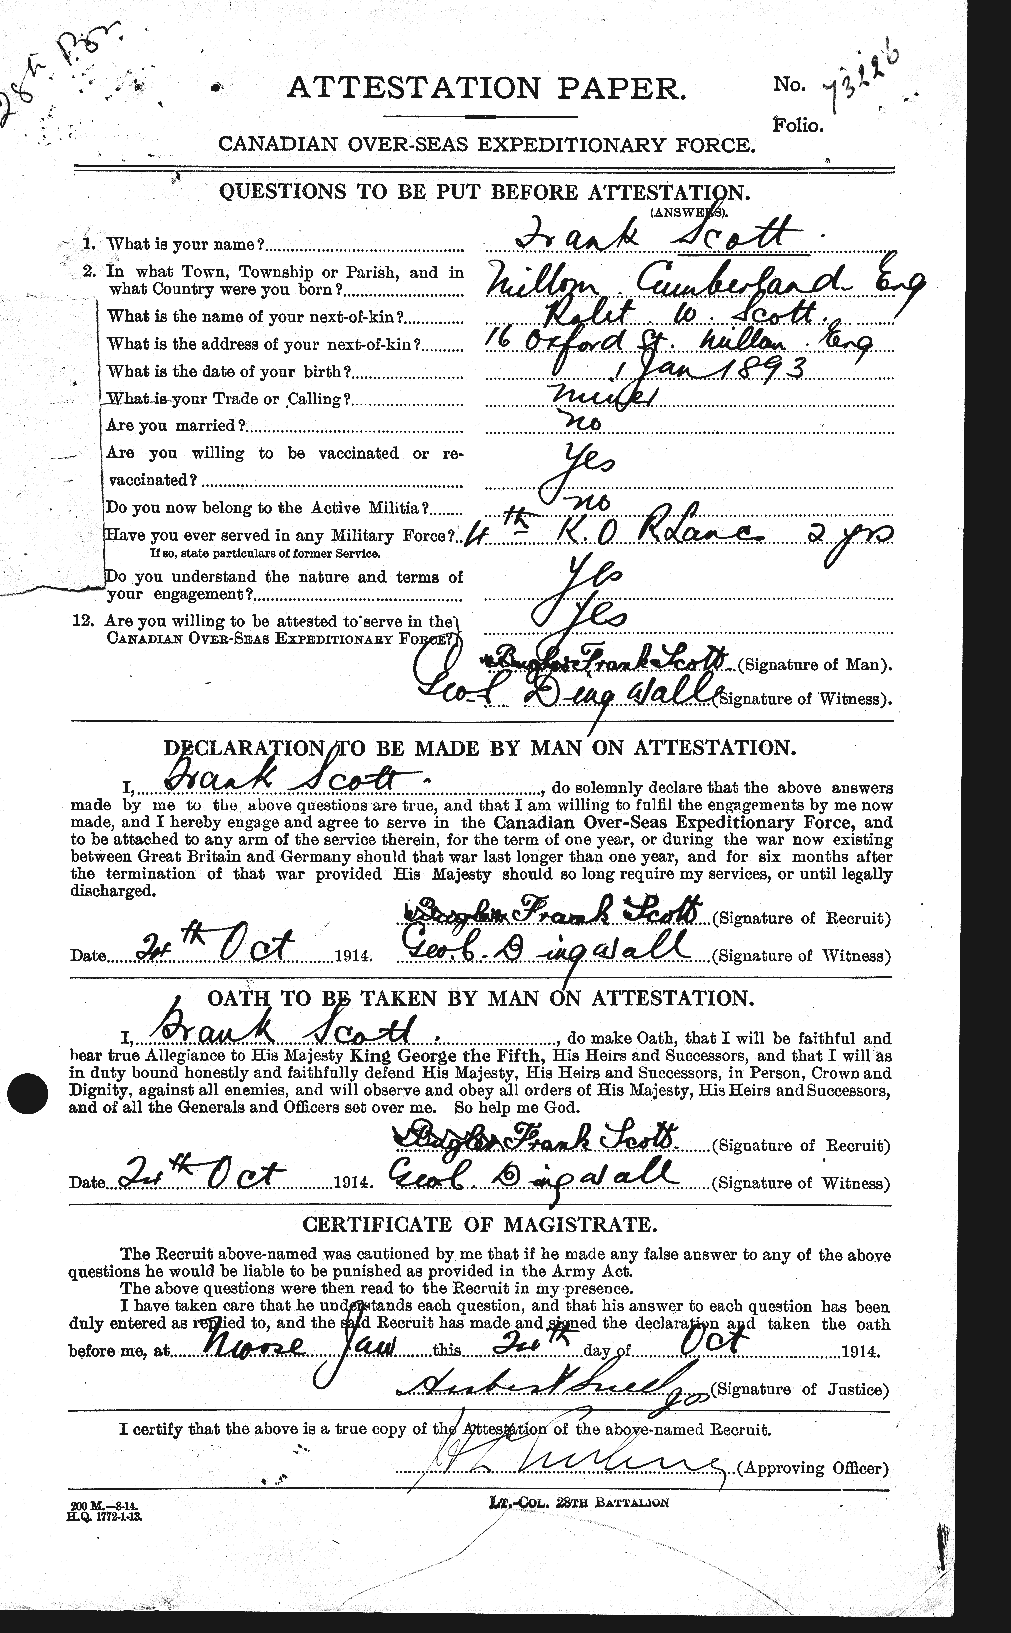 Personnel Records of the First World War - CEF 084711a